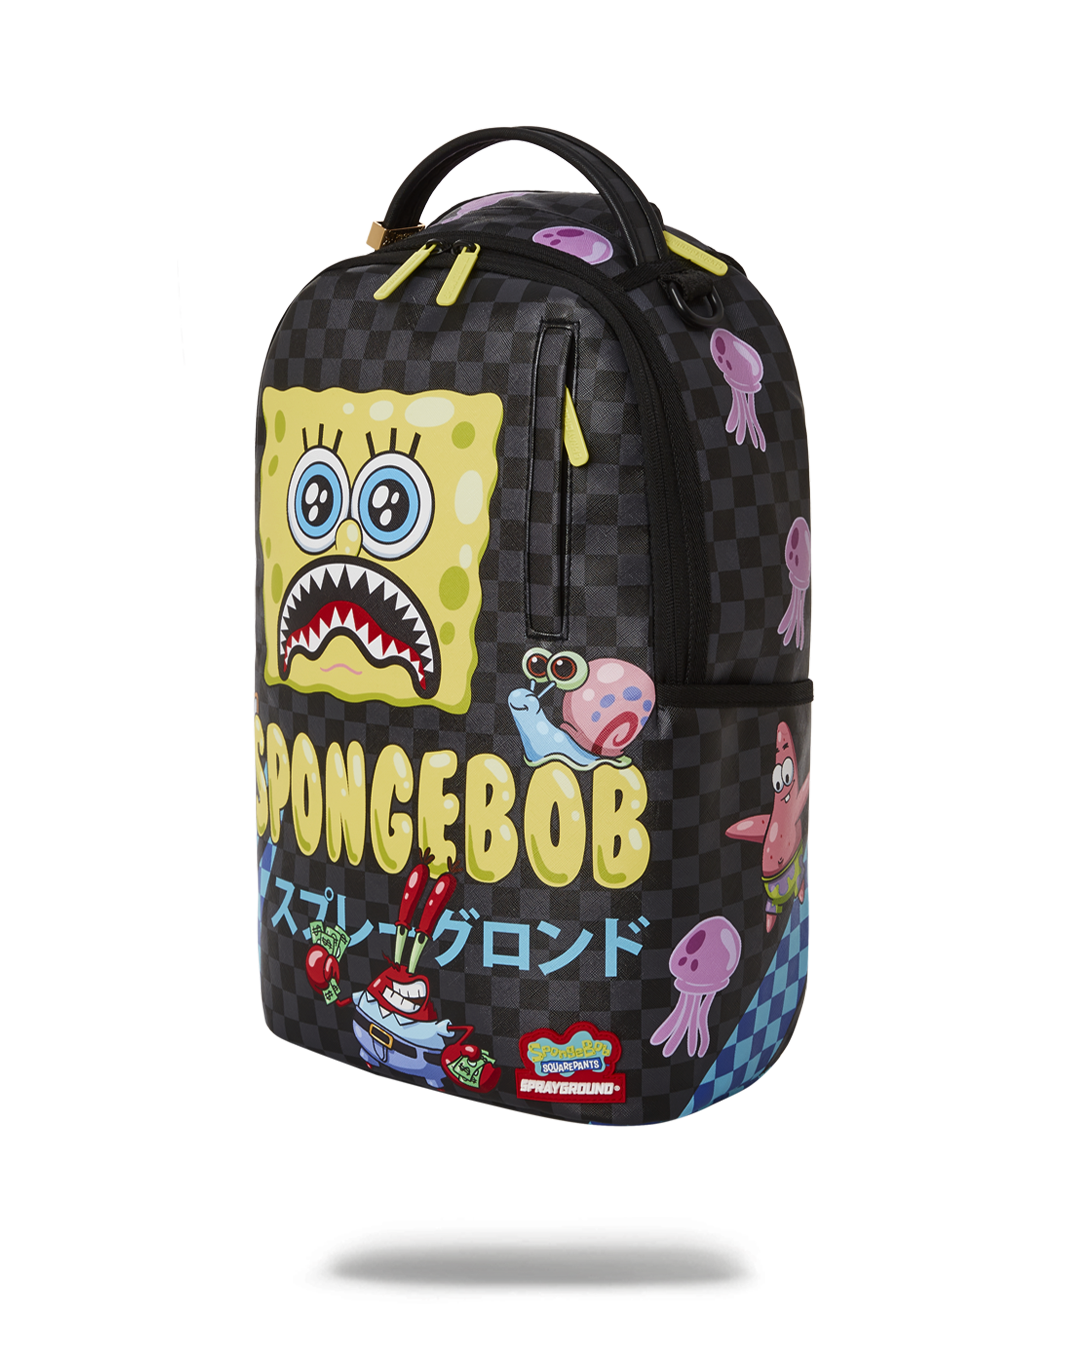 Sprayground Backpack One Piece | One Piece Accessories Backpack - Students  School - Aliexpress